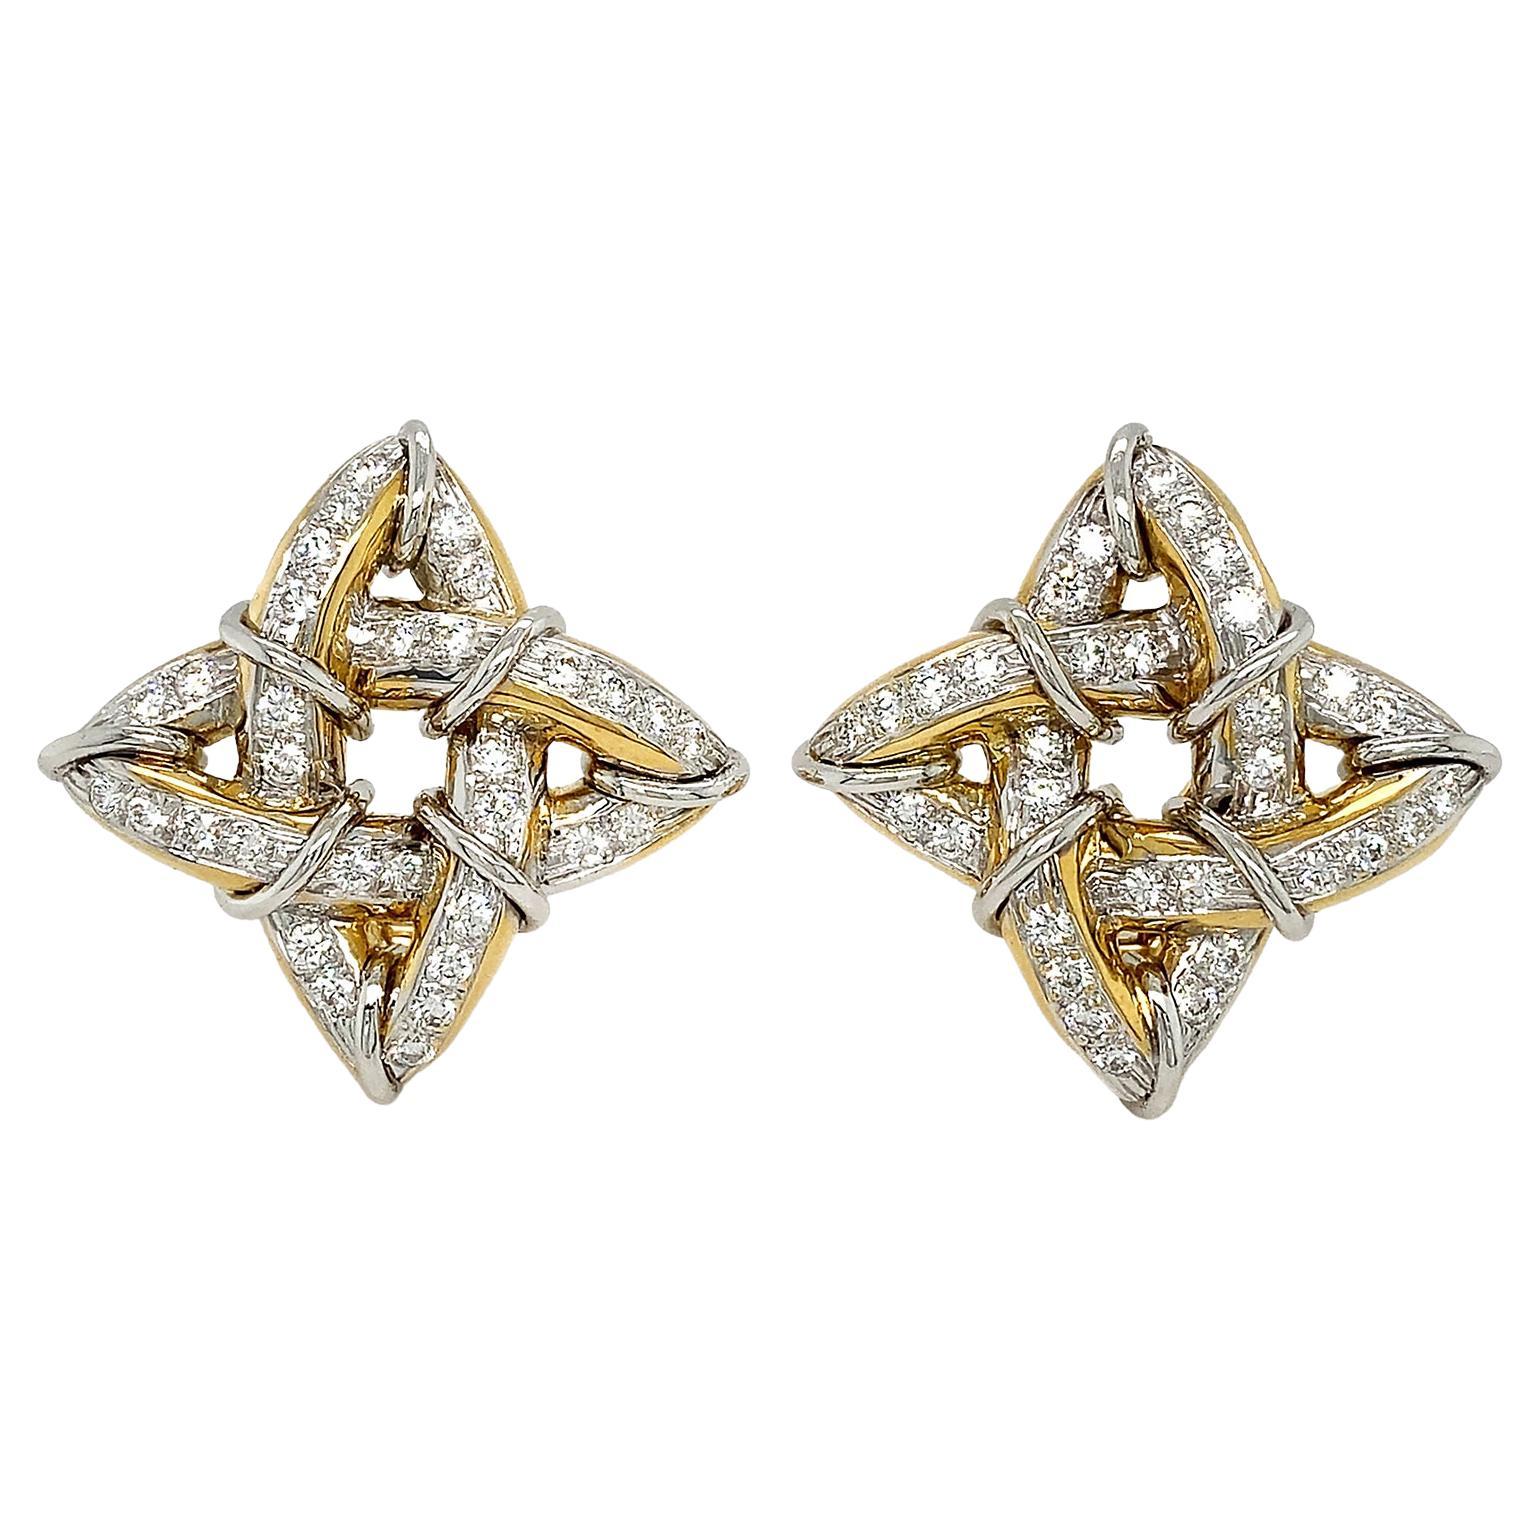 Gothic Diamond Platinum and 18K Yellow Gold Earrings